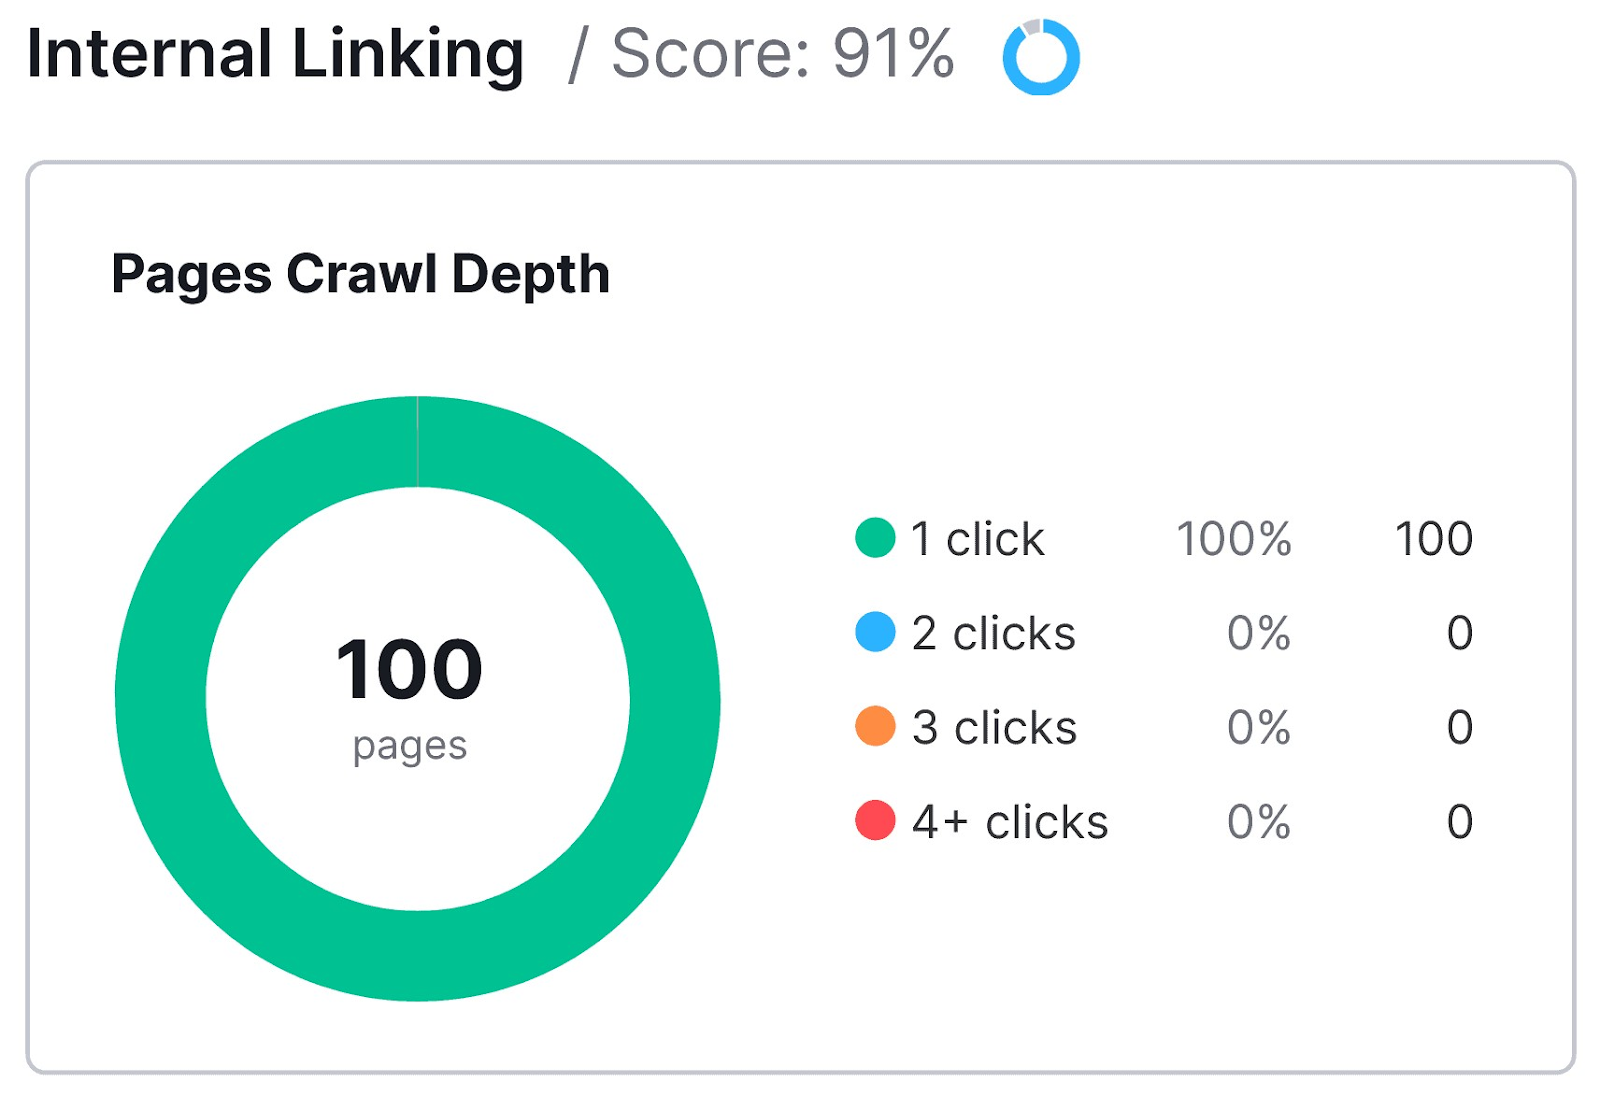 Pages Crawl Depth section of "Internal Linking" report